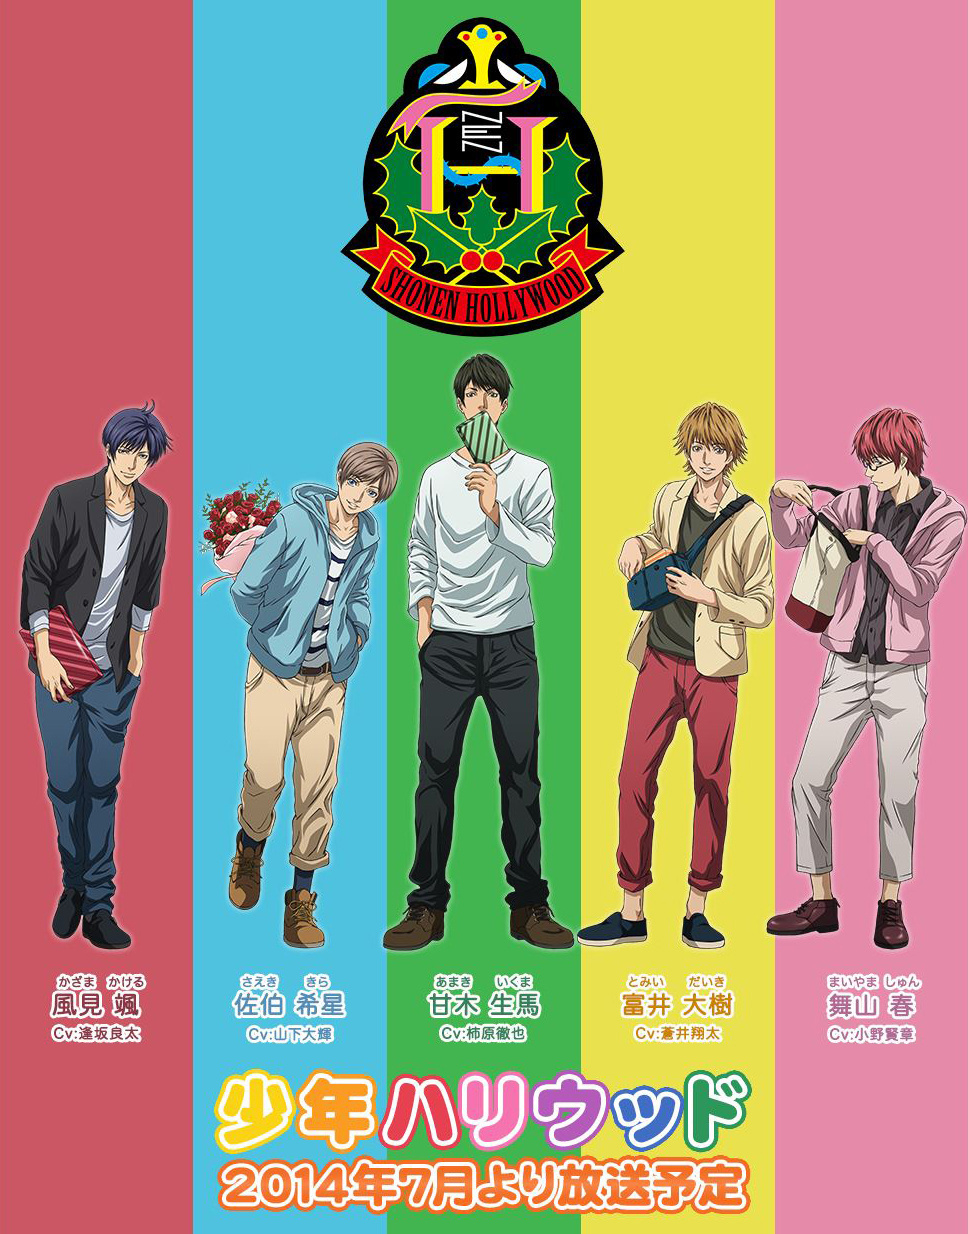 Shounen Hollywood: Holly Stage for 49 Visual 1